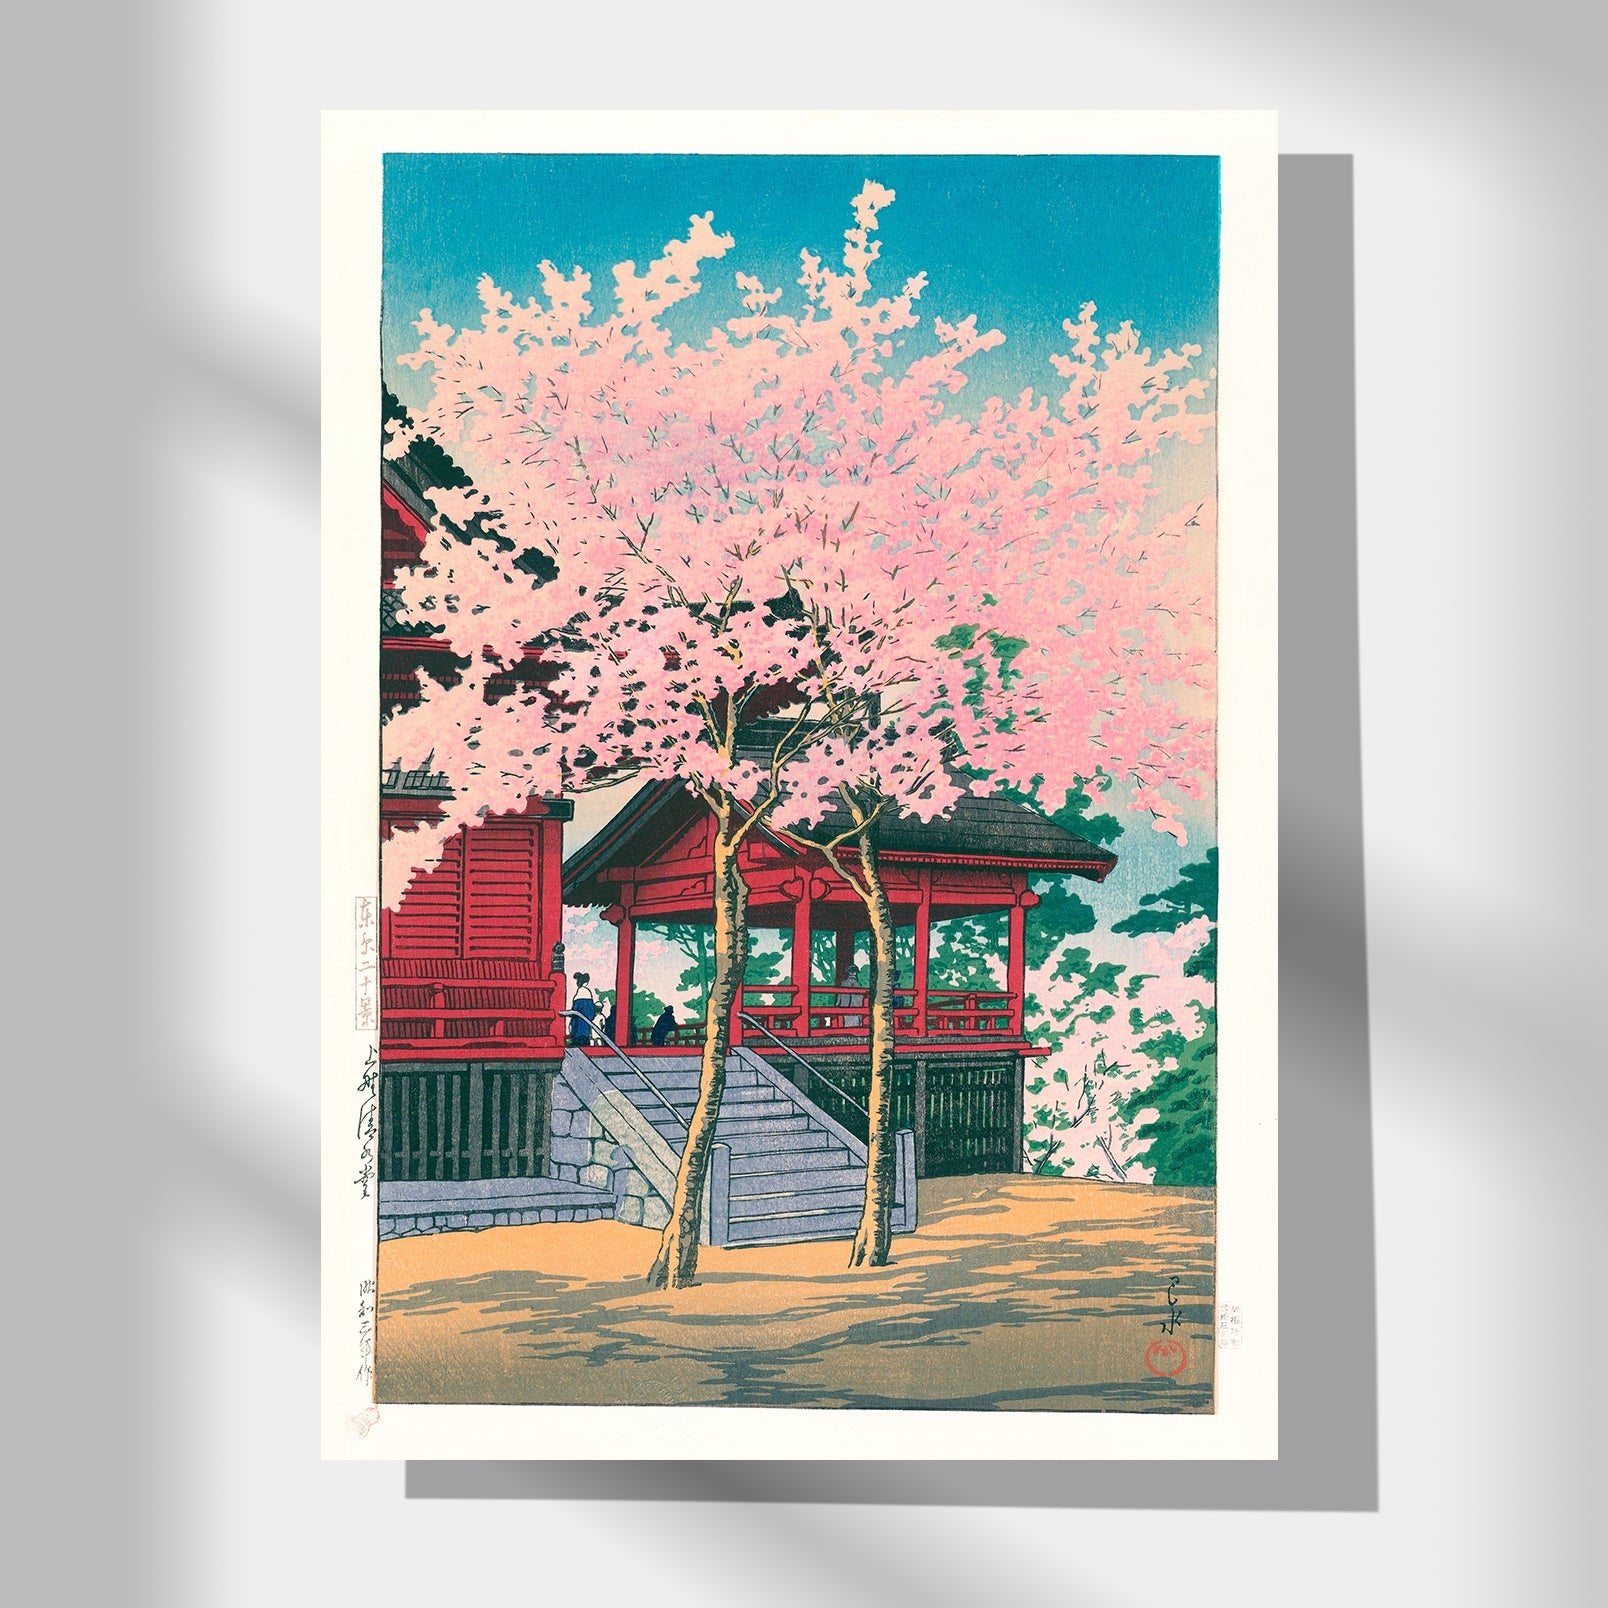 Japanese Art Poster: Cherry tree in bloom with a red building, Kiyomizu Kannon-dō Temple, by Kawase Hasui.